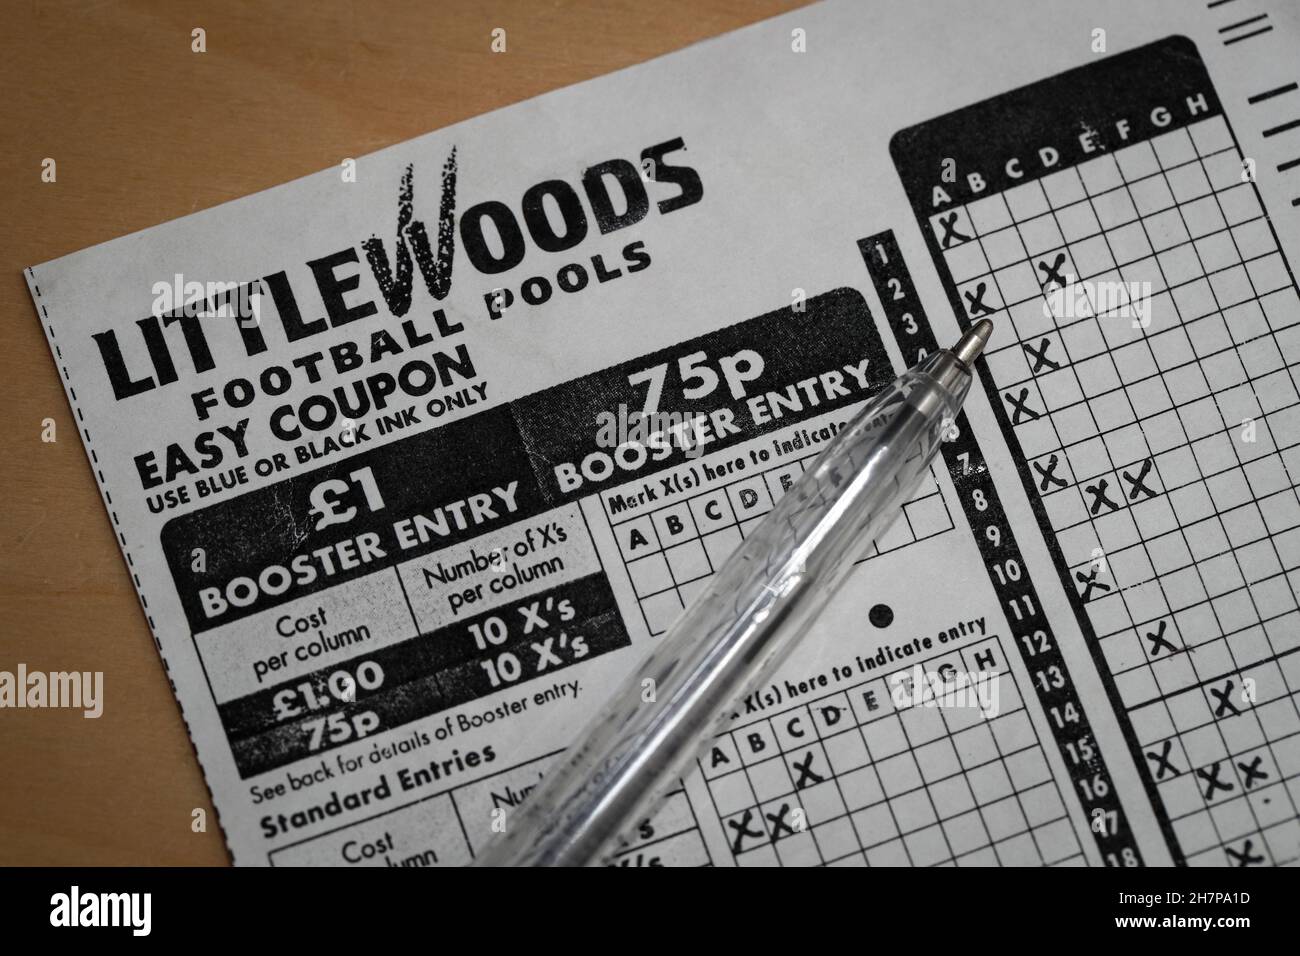 Littlewoods Football pools Coupon Stock Photo